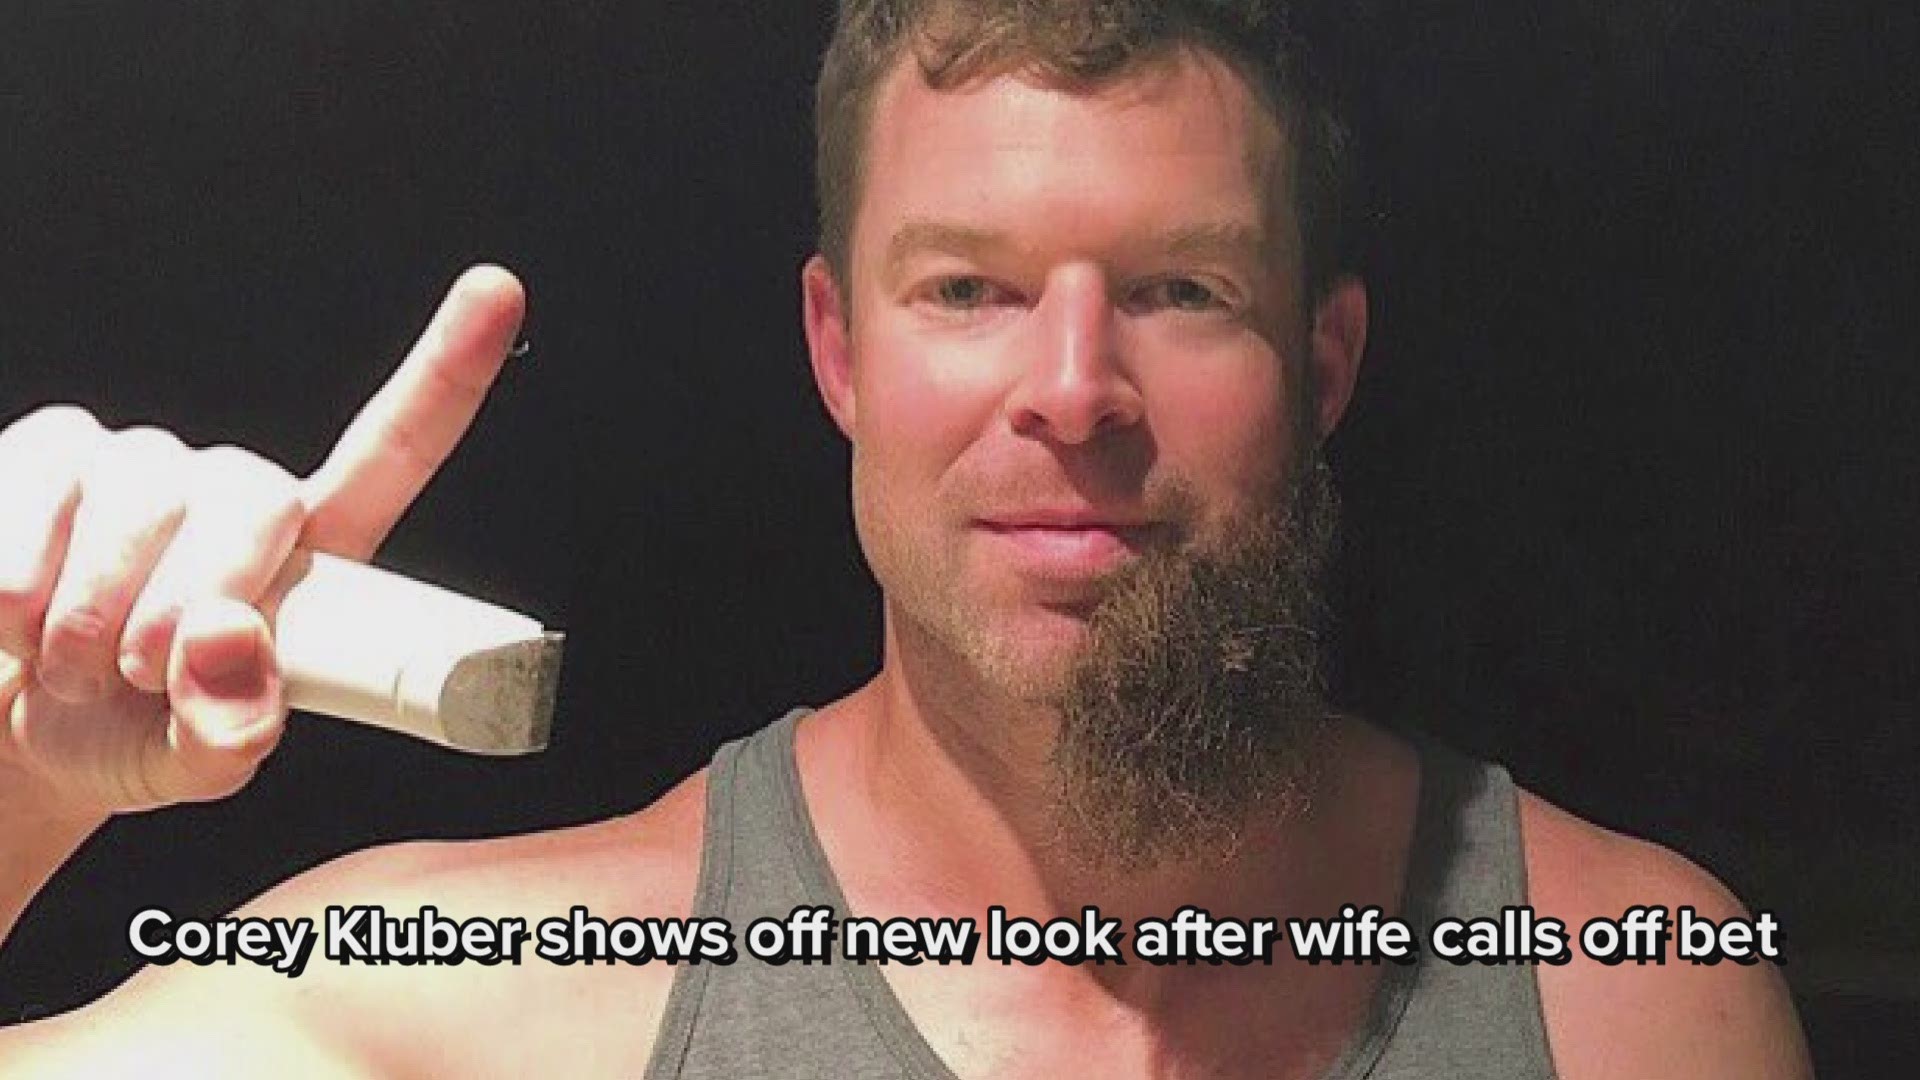 Cleveland Indians pitcher Corey Kluber shaves beard after wife ends bet